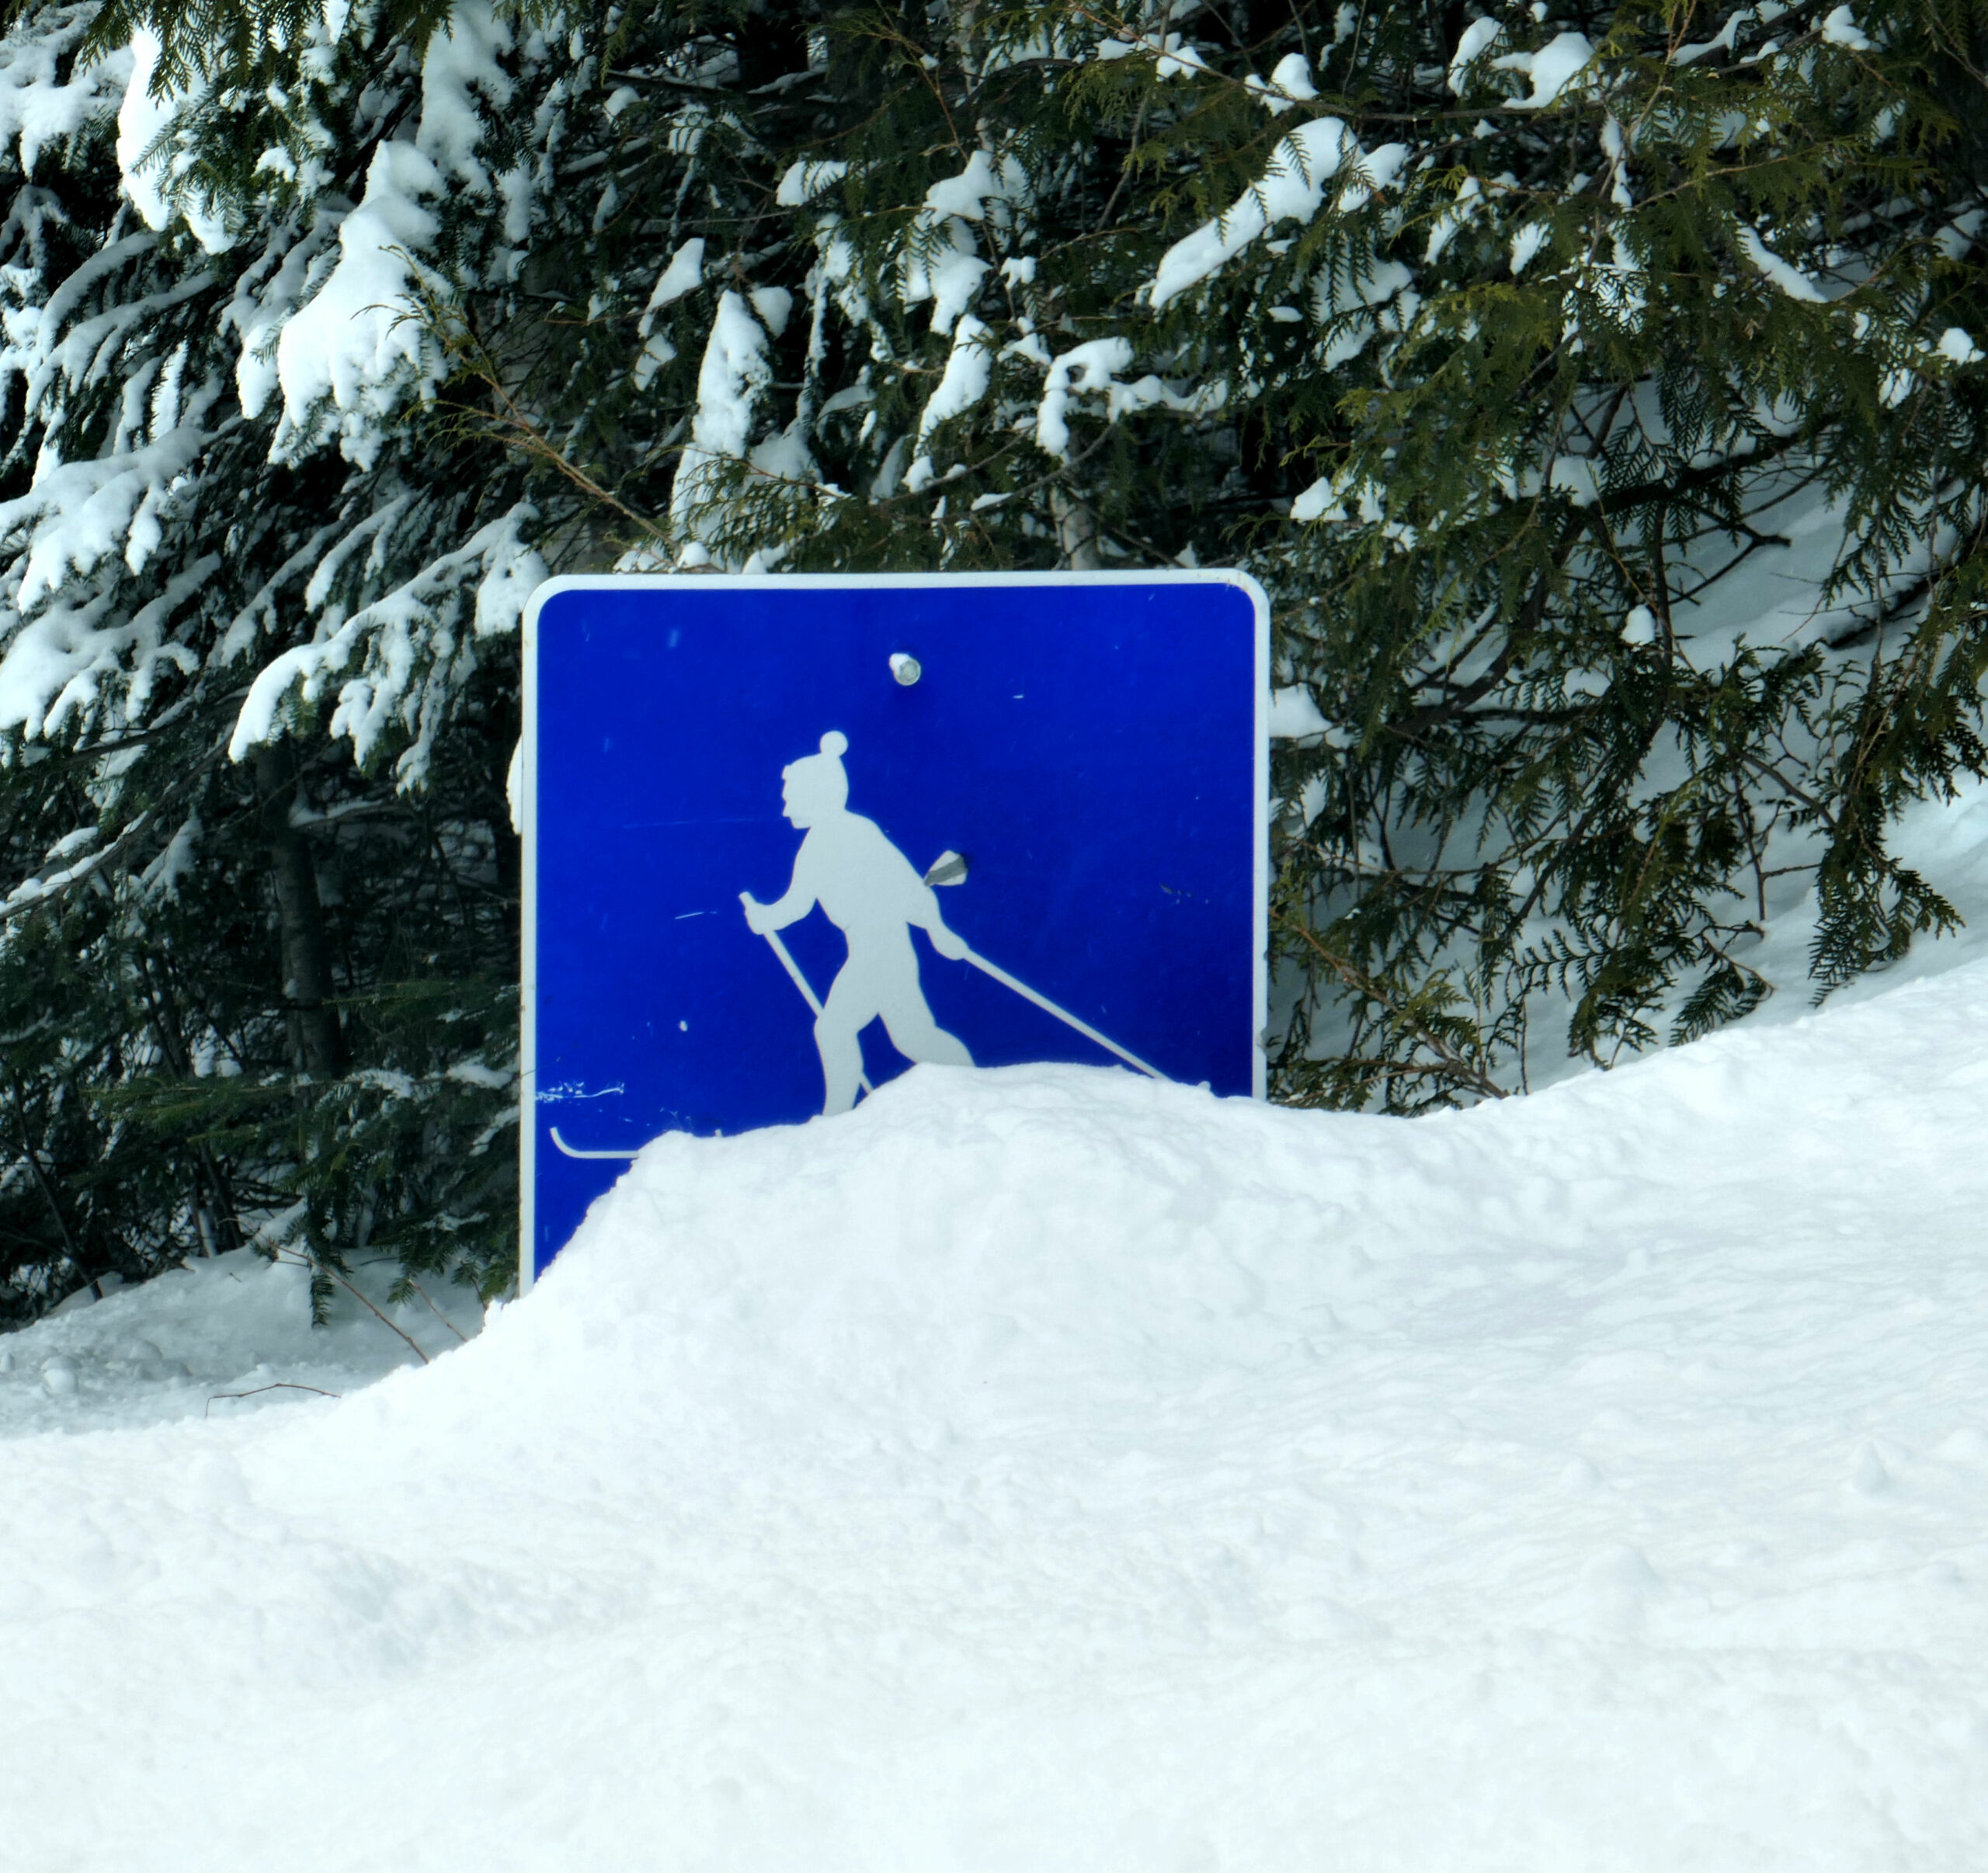 Blue sign with cross country skier on it partially covered by the snow